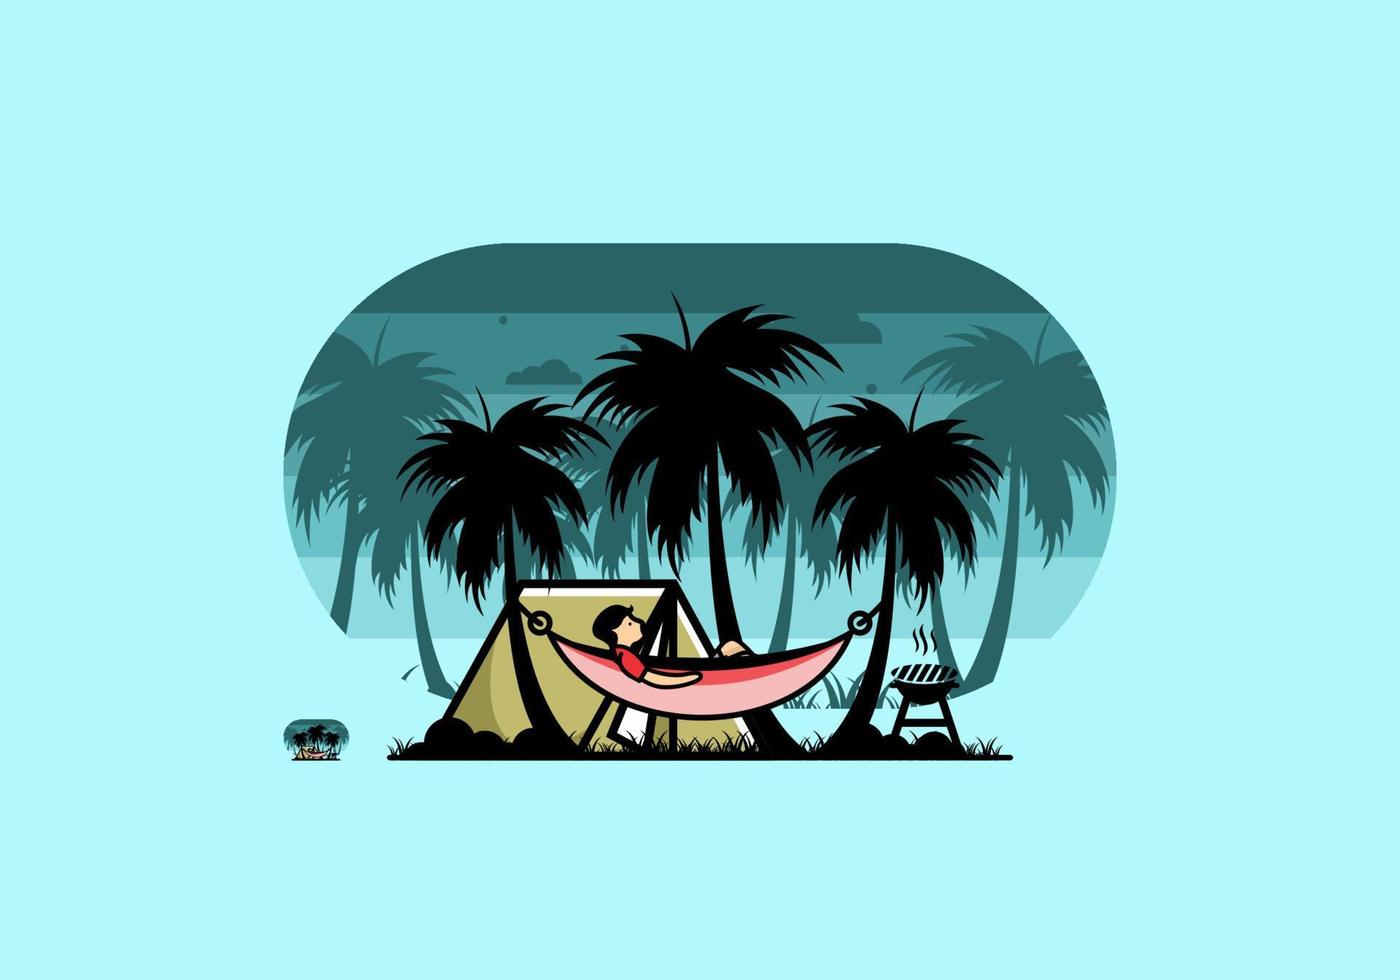 Tent and hammock with coconut trees illustration vector